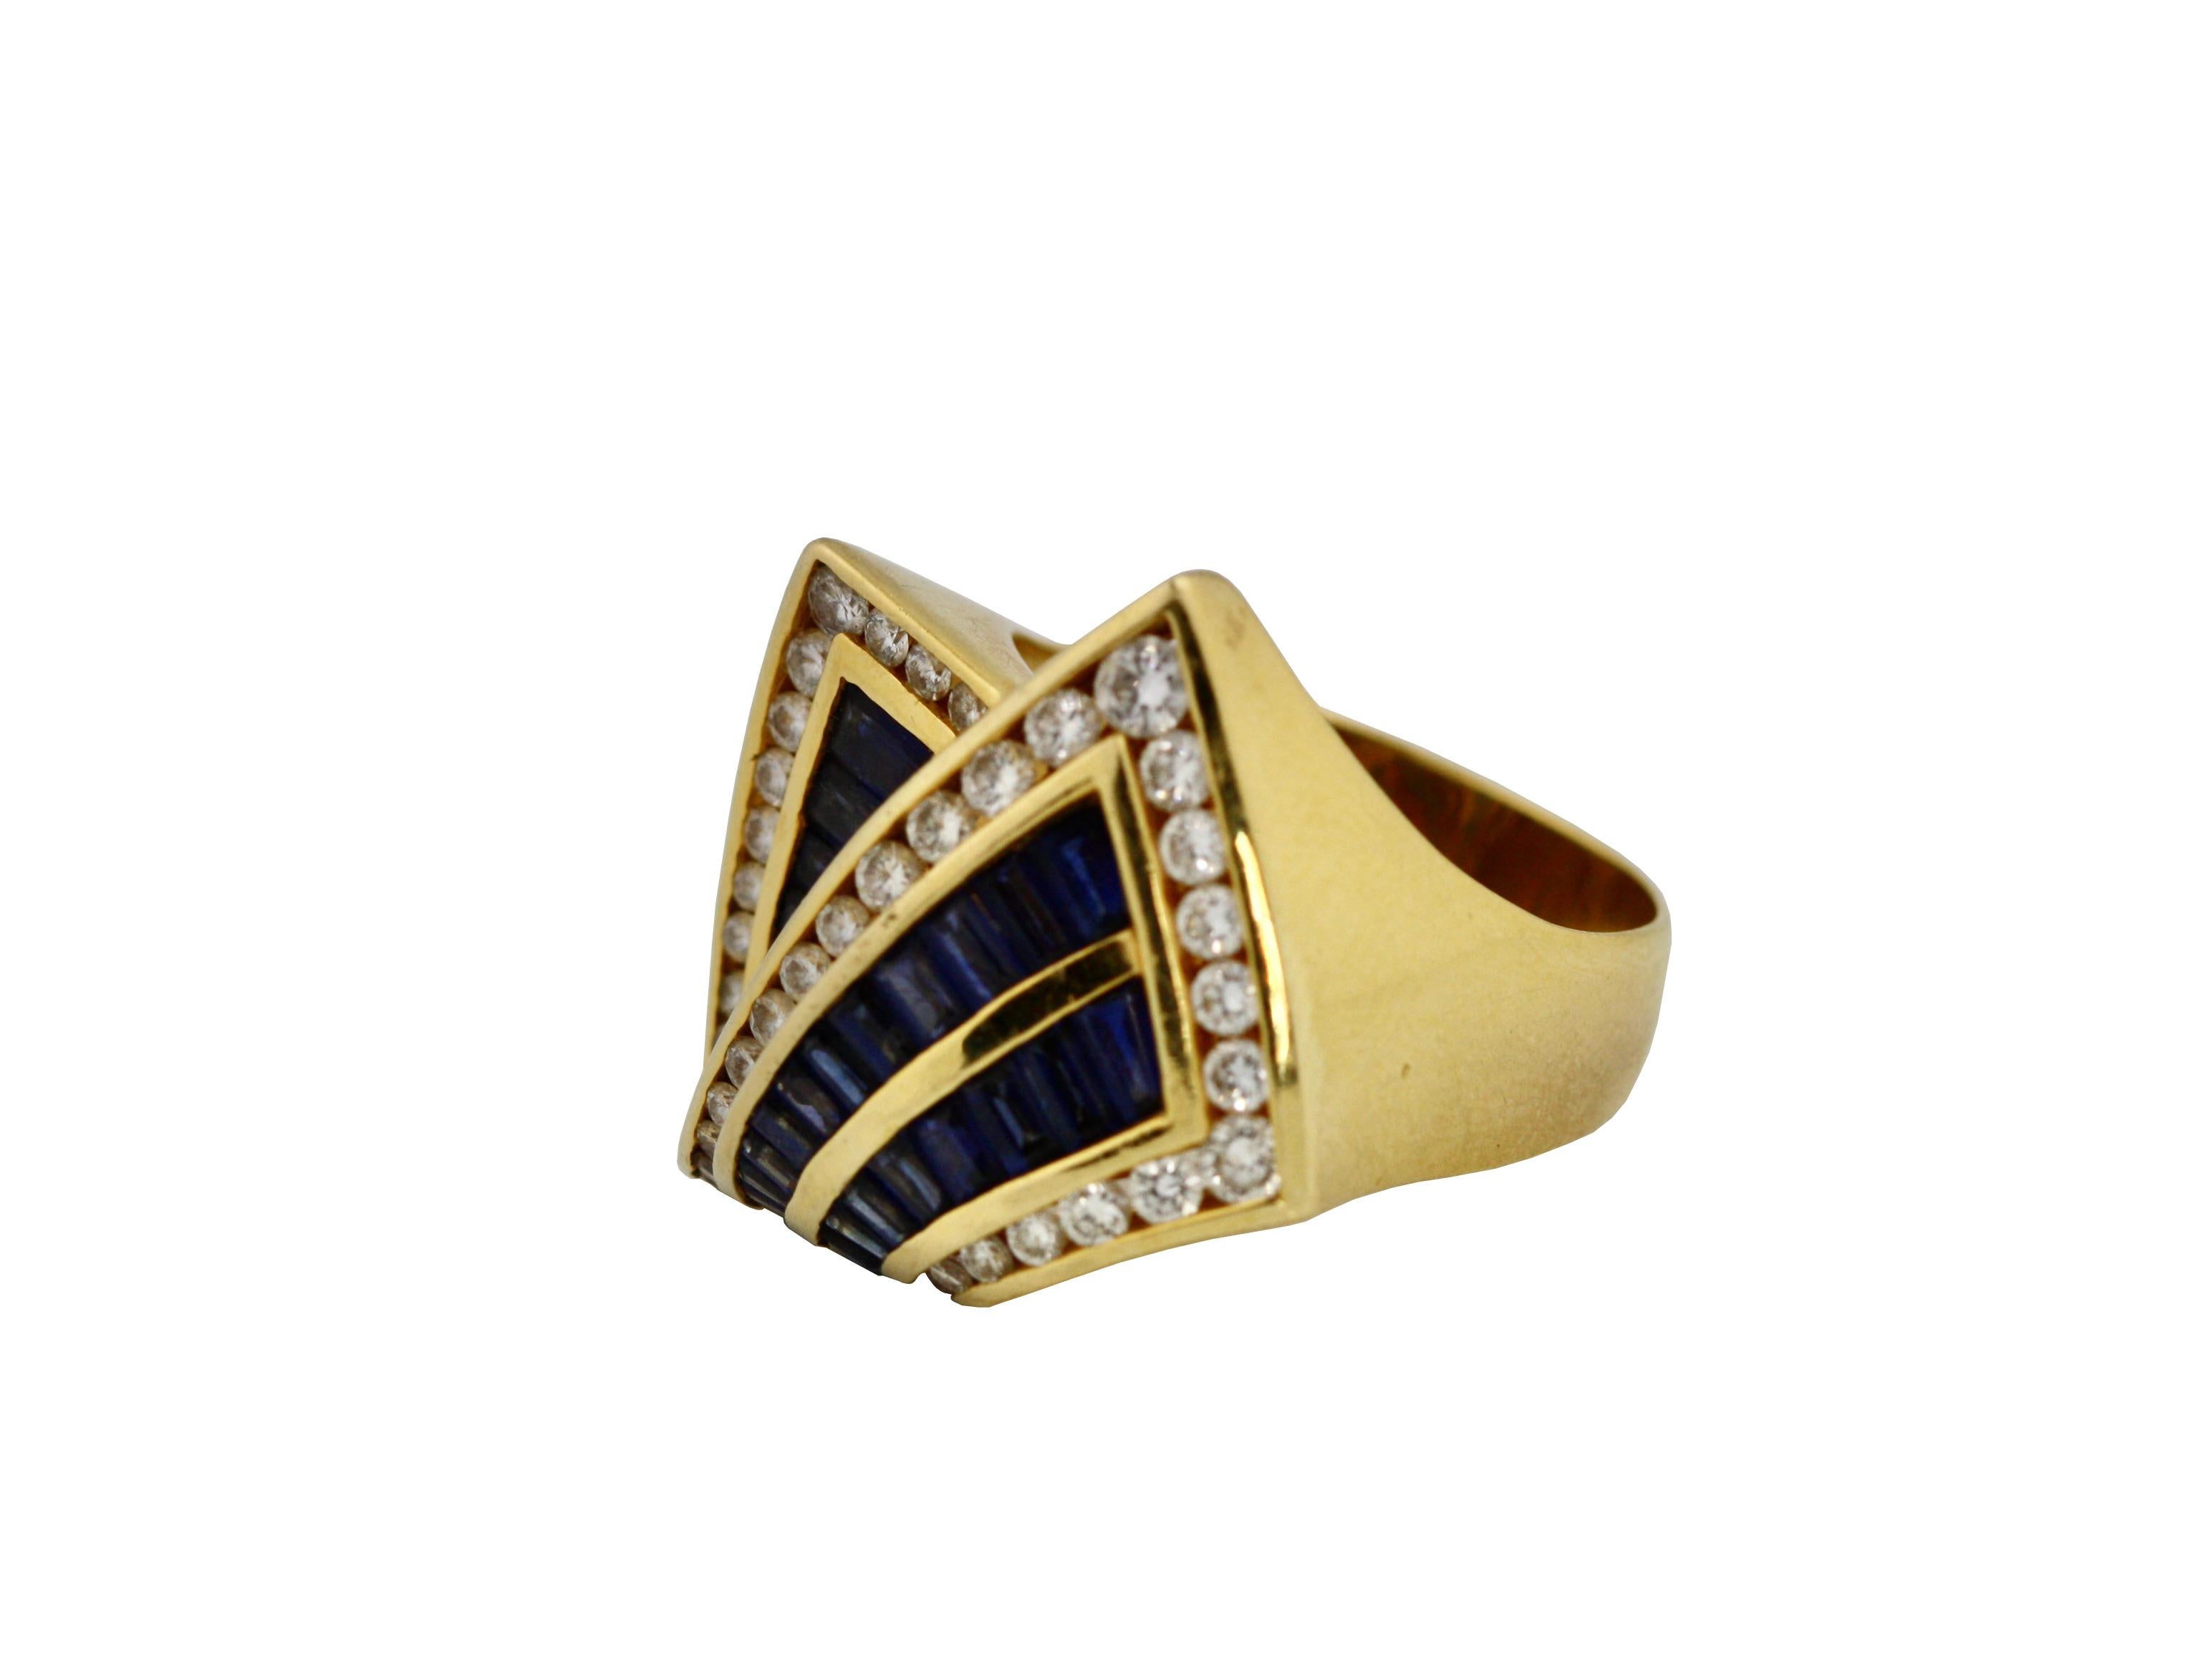 Charles Krypell
18K Gold, Sapphire and Diamond Ring
41 diamonds approx .70 cts,
13 grams (gross) , size 8

